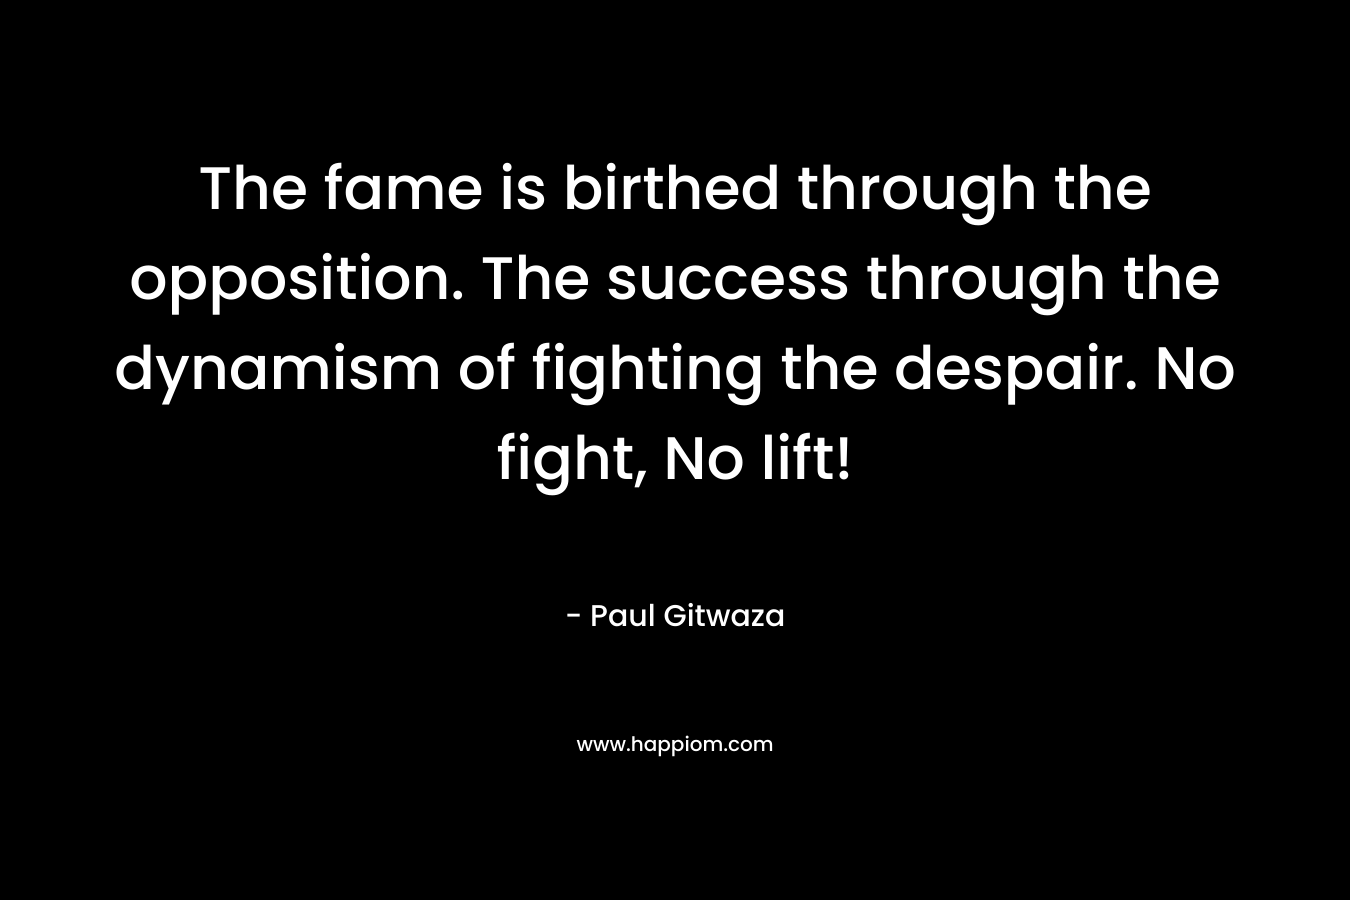 The fame is birthed through the opposition. The success through the dynamism of fighting the despair. No fight, No lift!